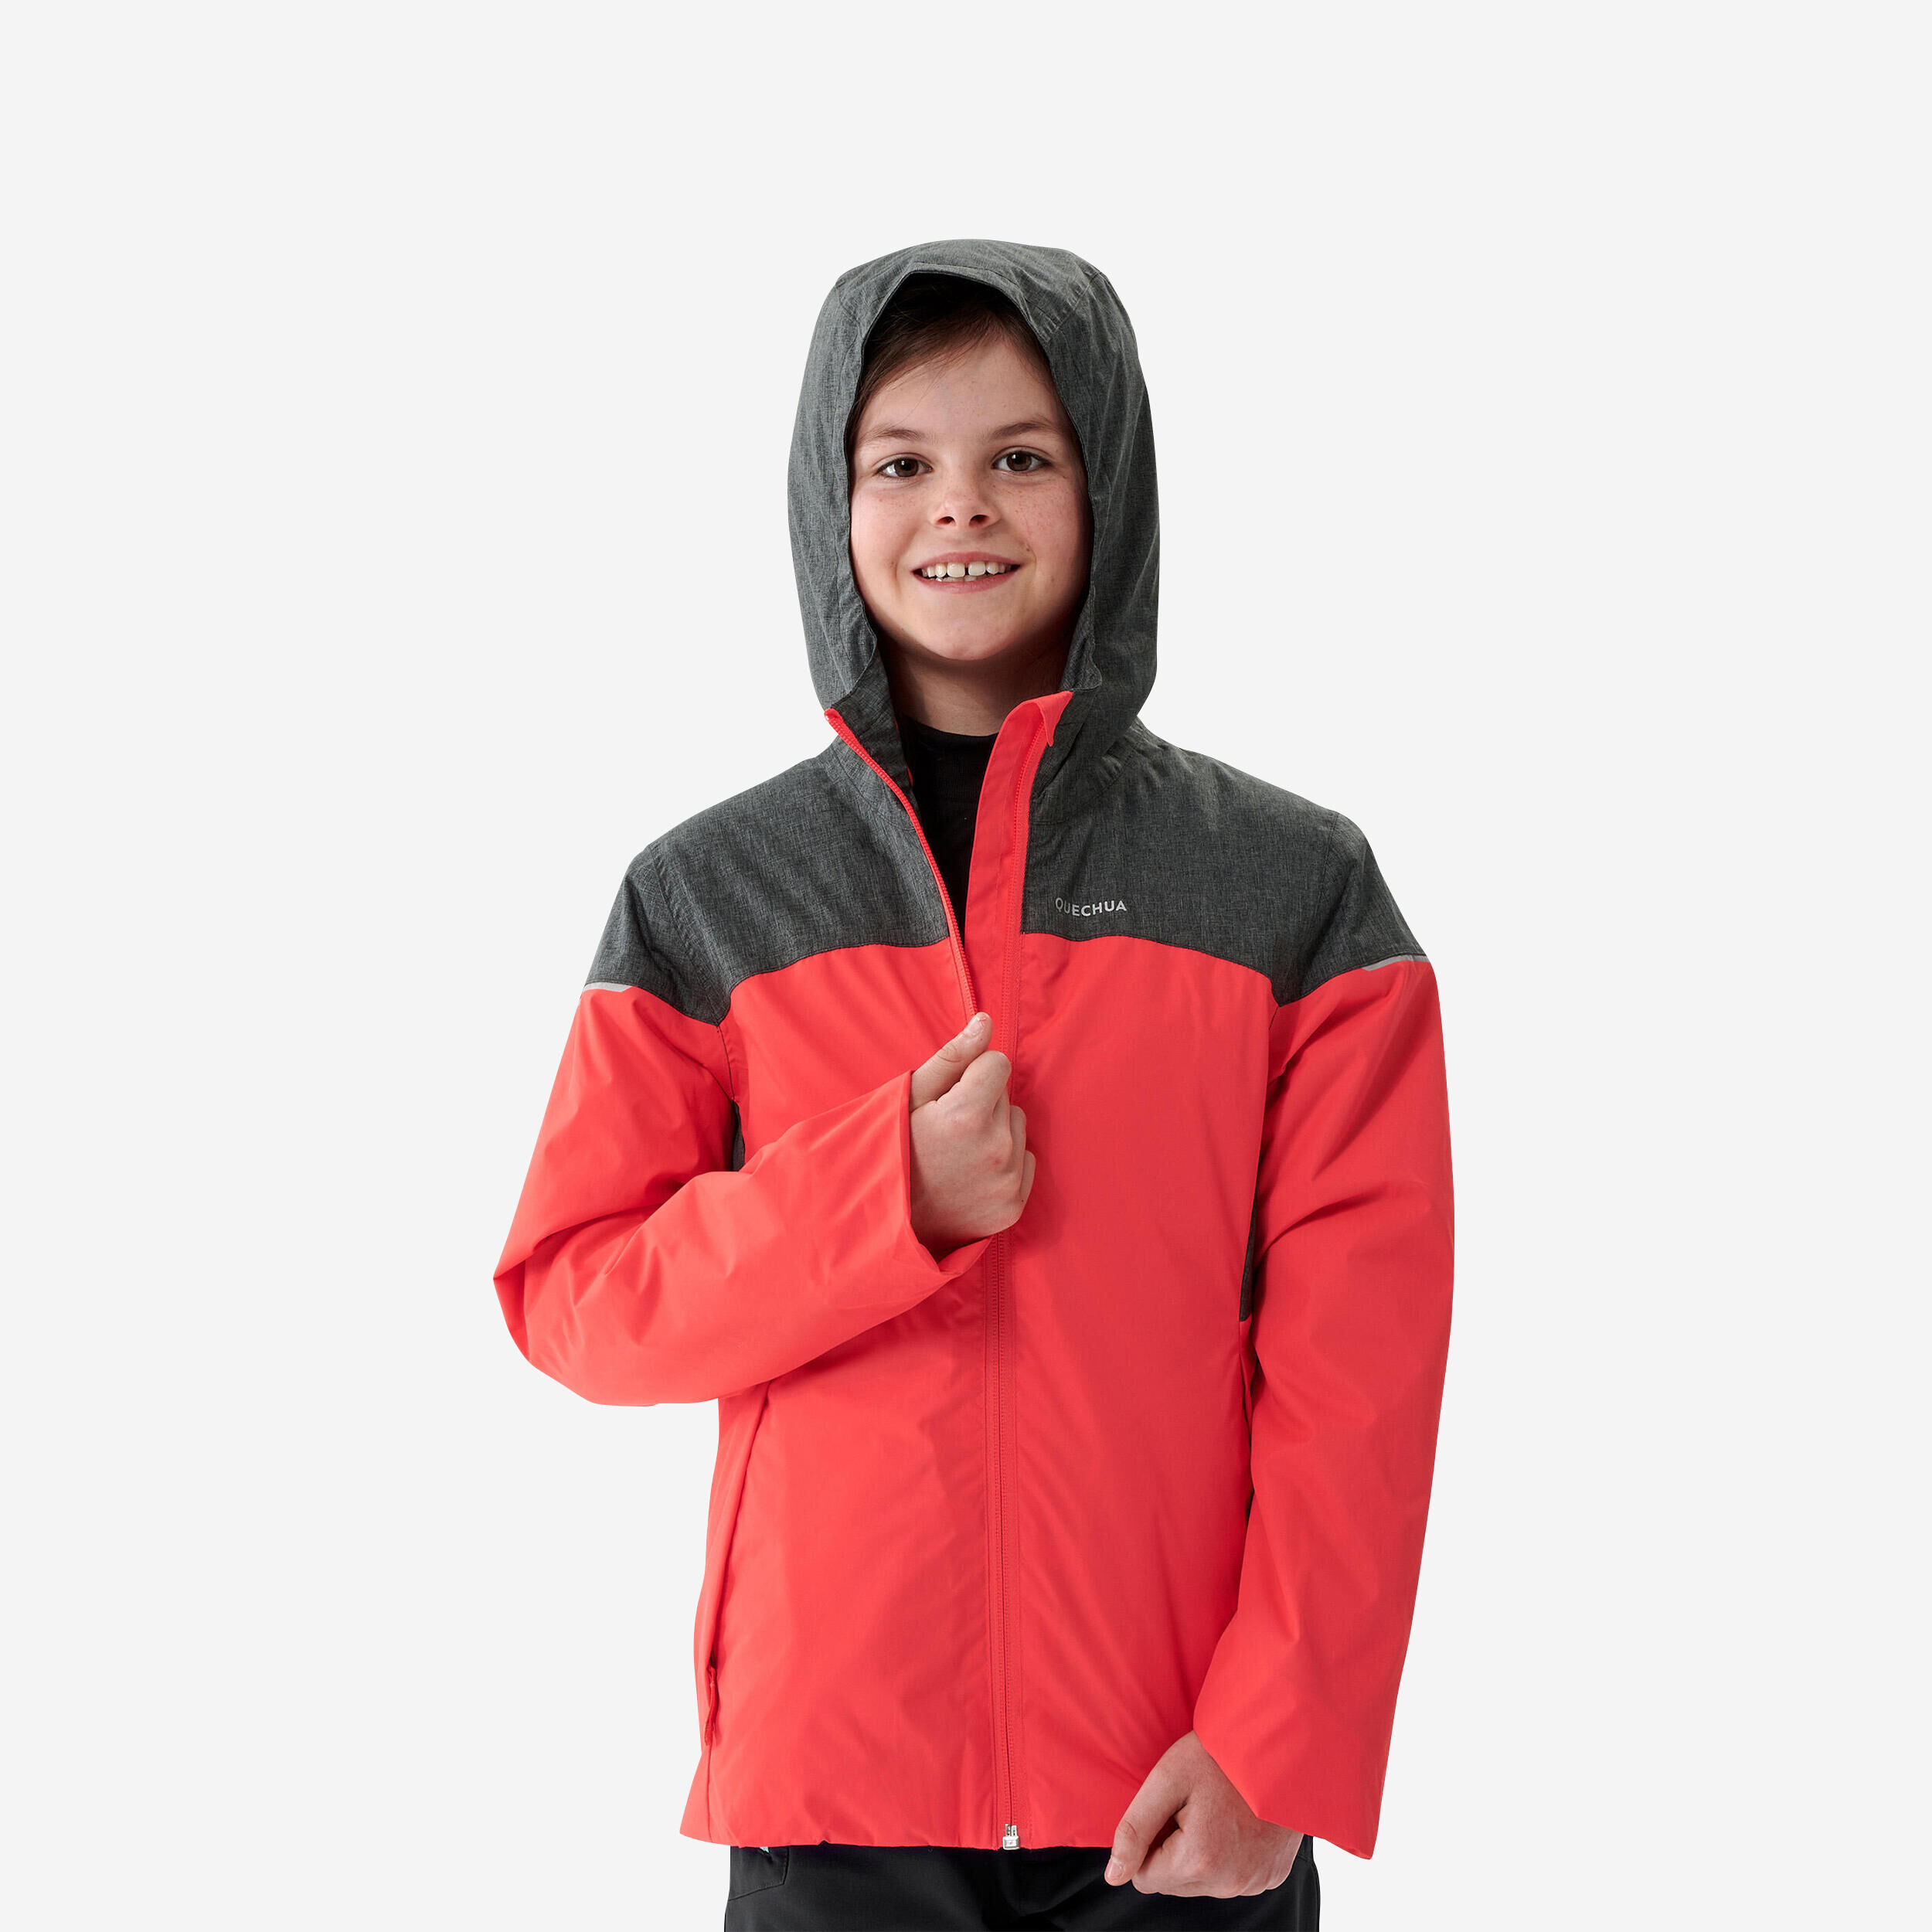 QUECHUA CHILDREN’S WARM AND WATERPROOF HIKING JACKET - SH100 -3°C AGE 7-15 